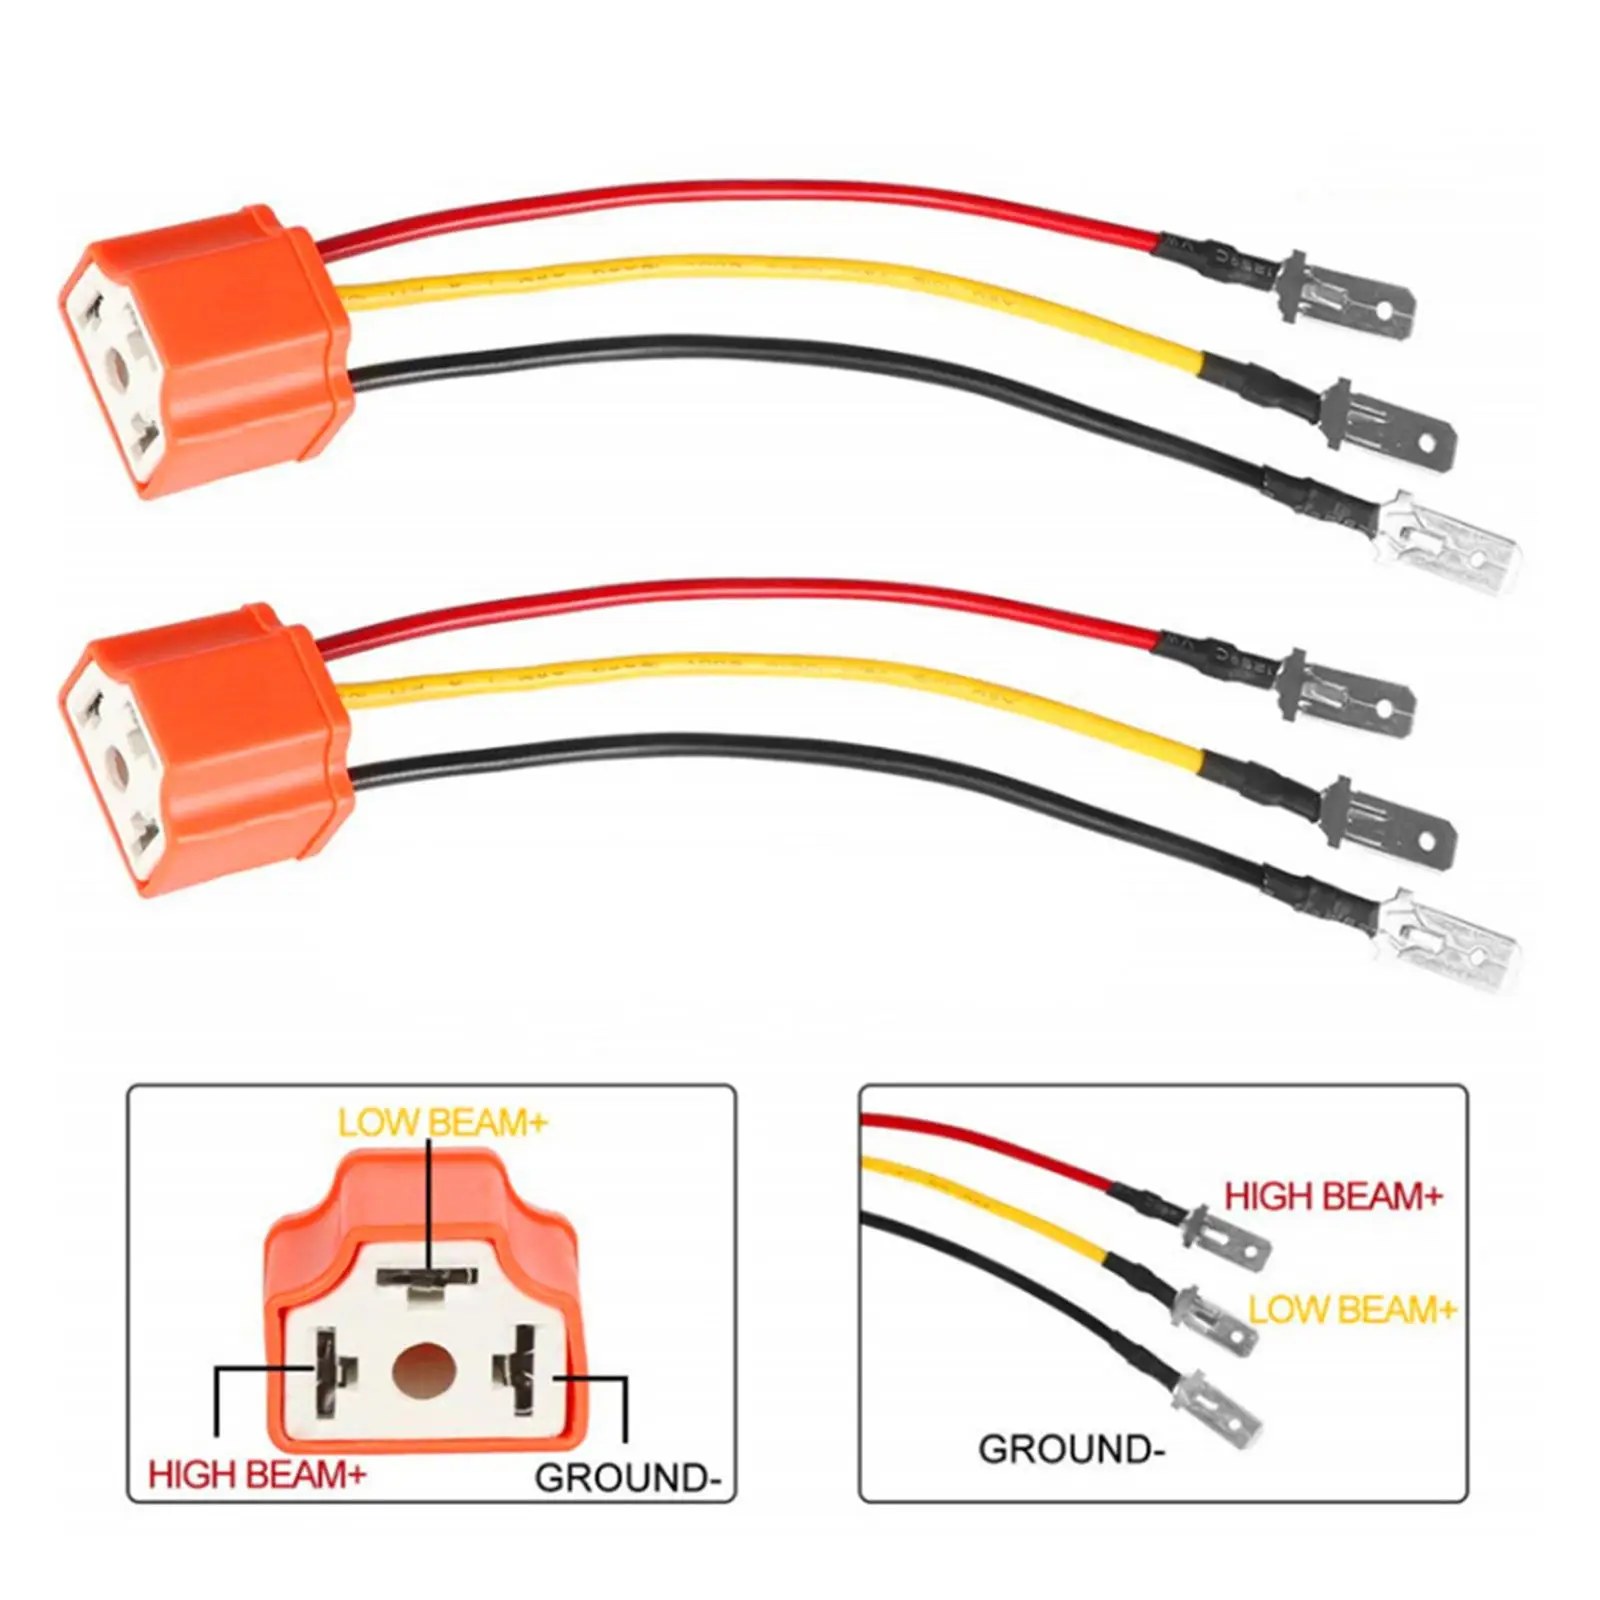 H4 9003 HB2 Headlight Connector Heavy Duty 14AWG Ceramic Wire Wiring Harness For Car Truck Boat Light Retrofit Pack of 2 